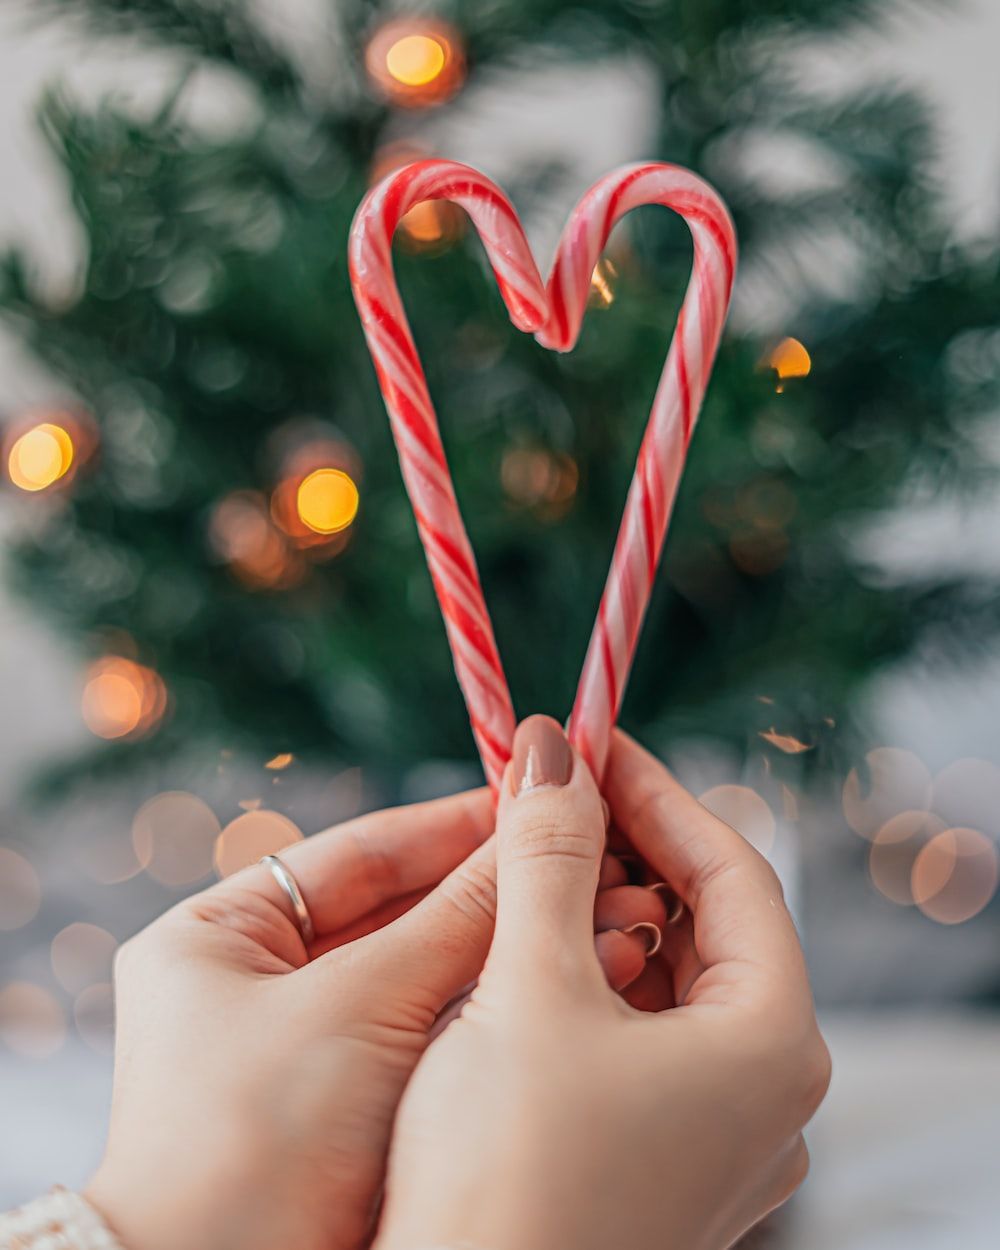 A woman's hands holding two candy canes in the shape of a heart. - Candy cane